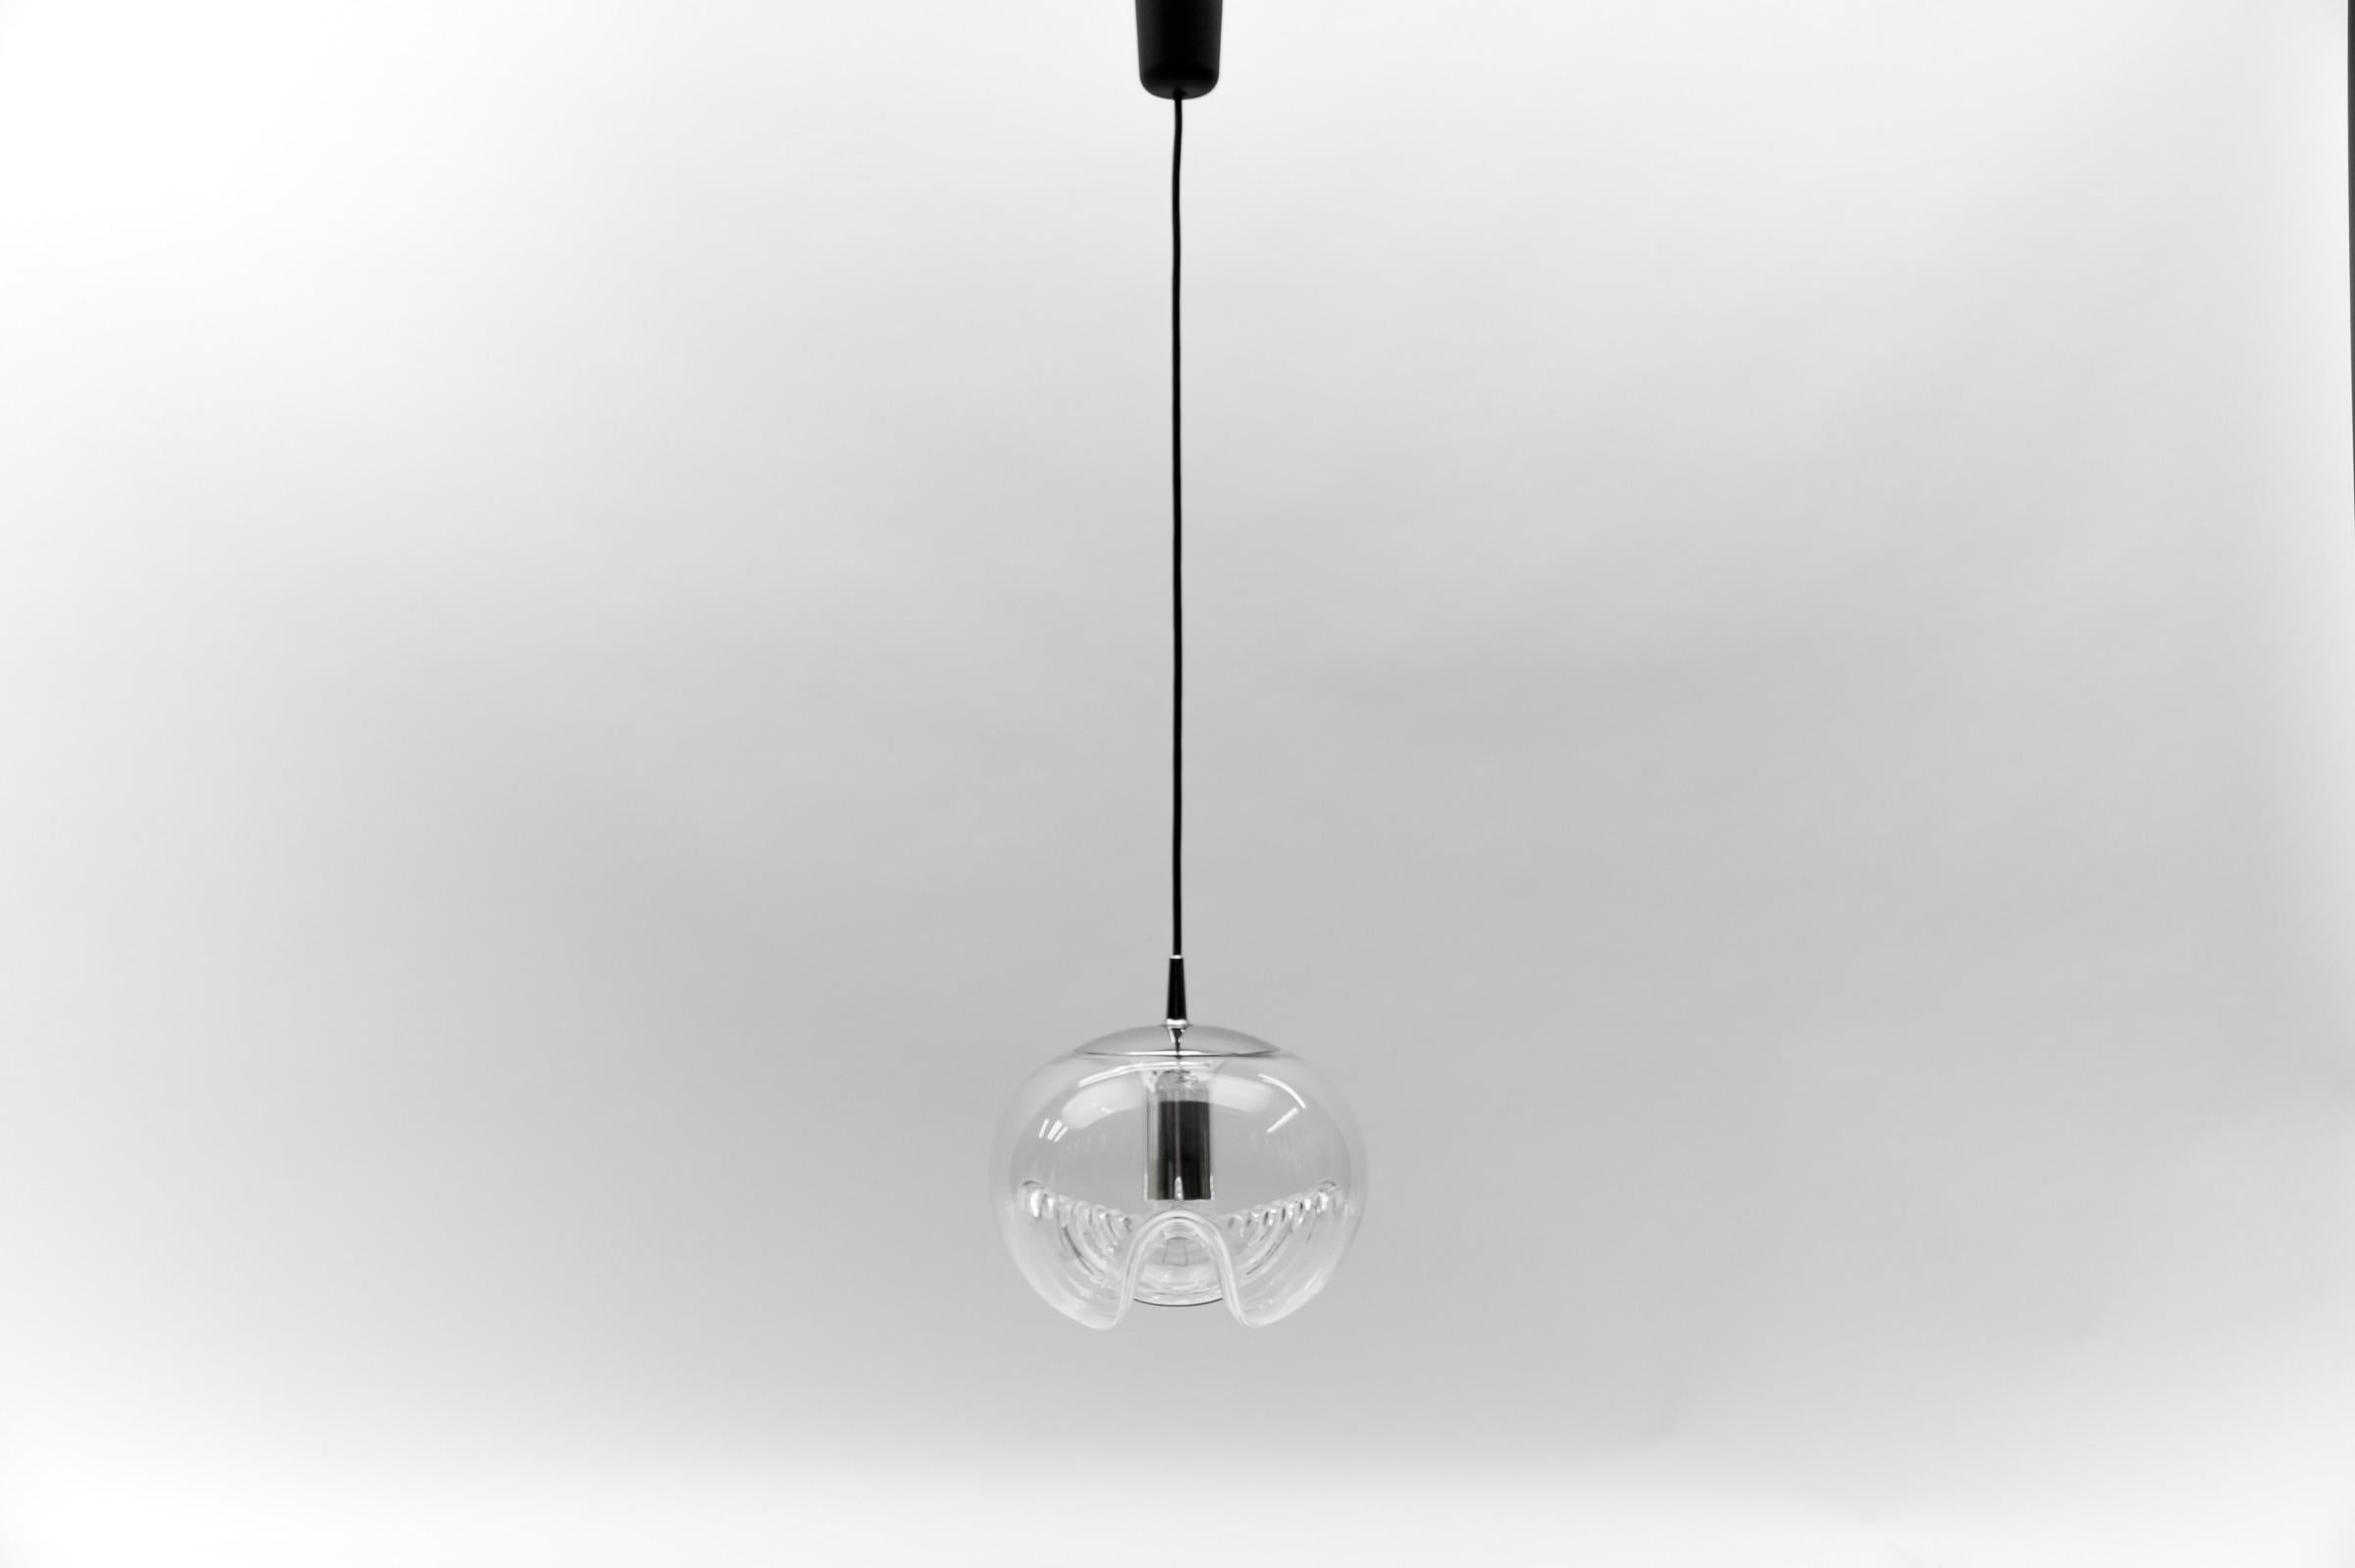 Ceiling lamp wave by Koch & Lowy for Peill & Putzler, Germany Düren, 1970s.

1 x E27 Edison screw fit bulb holder, is rewired and in working condition. It runs both on 110/230 Volt.